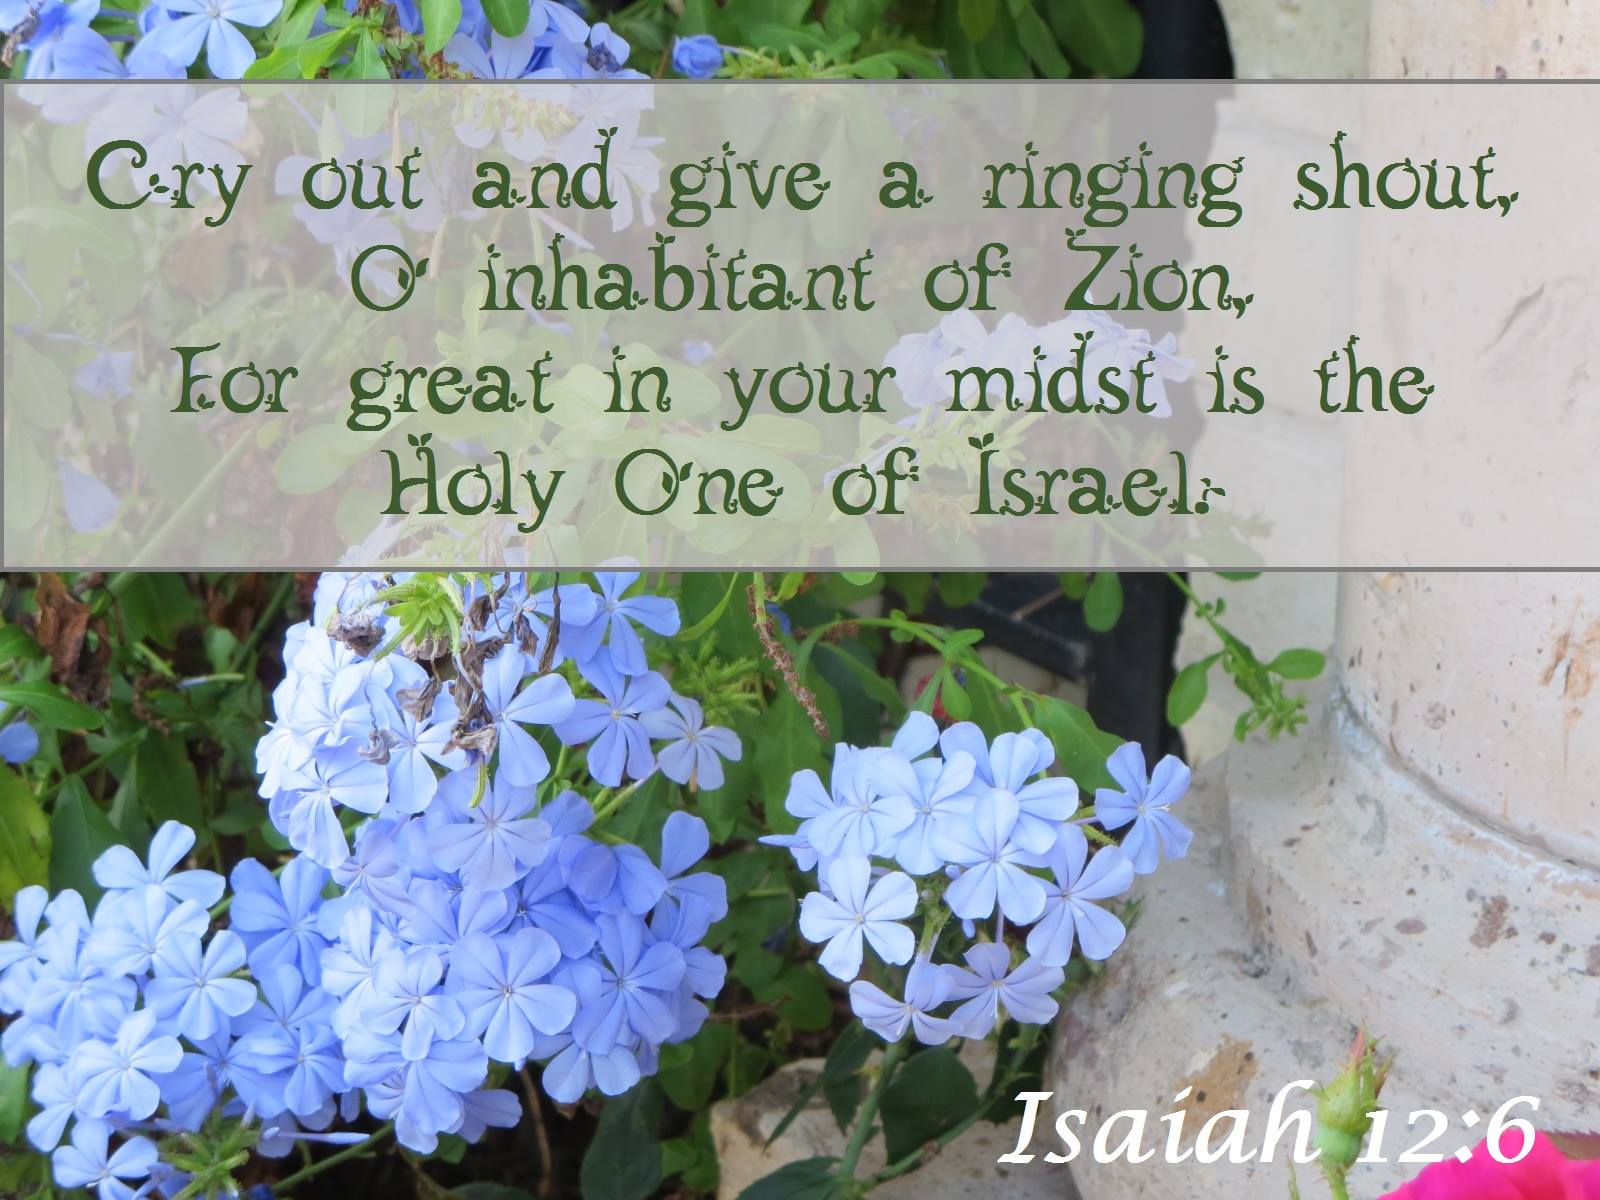 Isaiah 12:6 Cry out and give a ringing shout, O inhabitant of Zion, For great in your midst is the Holy One of Israel.